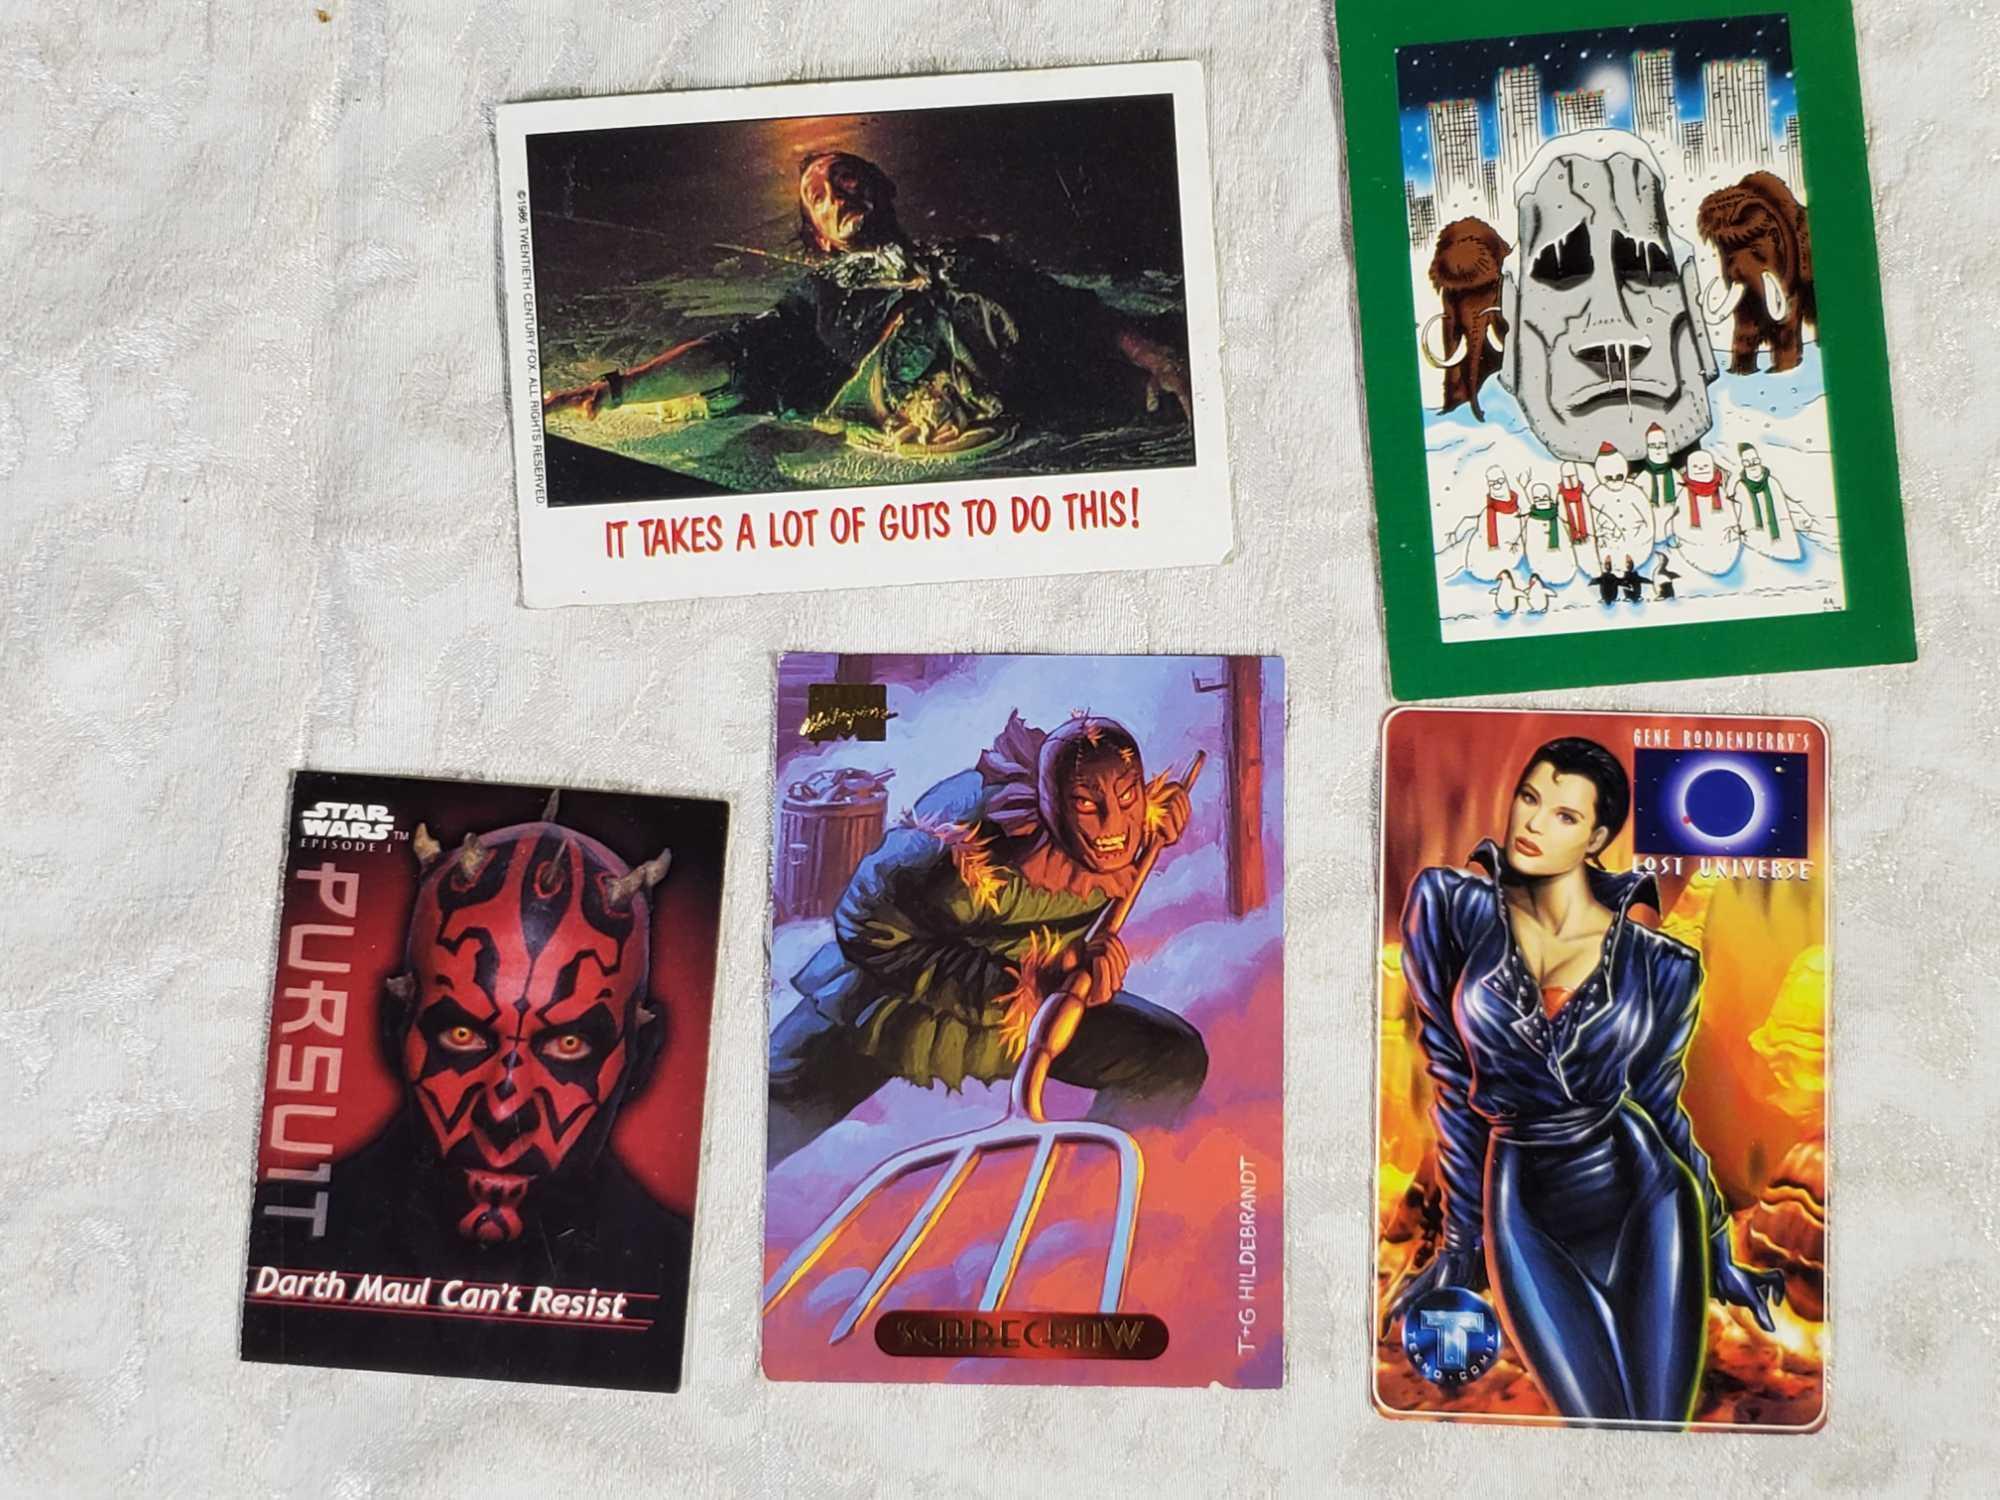 Several Albums of Mixed Collector Cards - Gremlins, Batman, Dune, Jaws and More